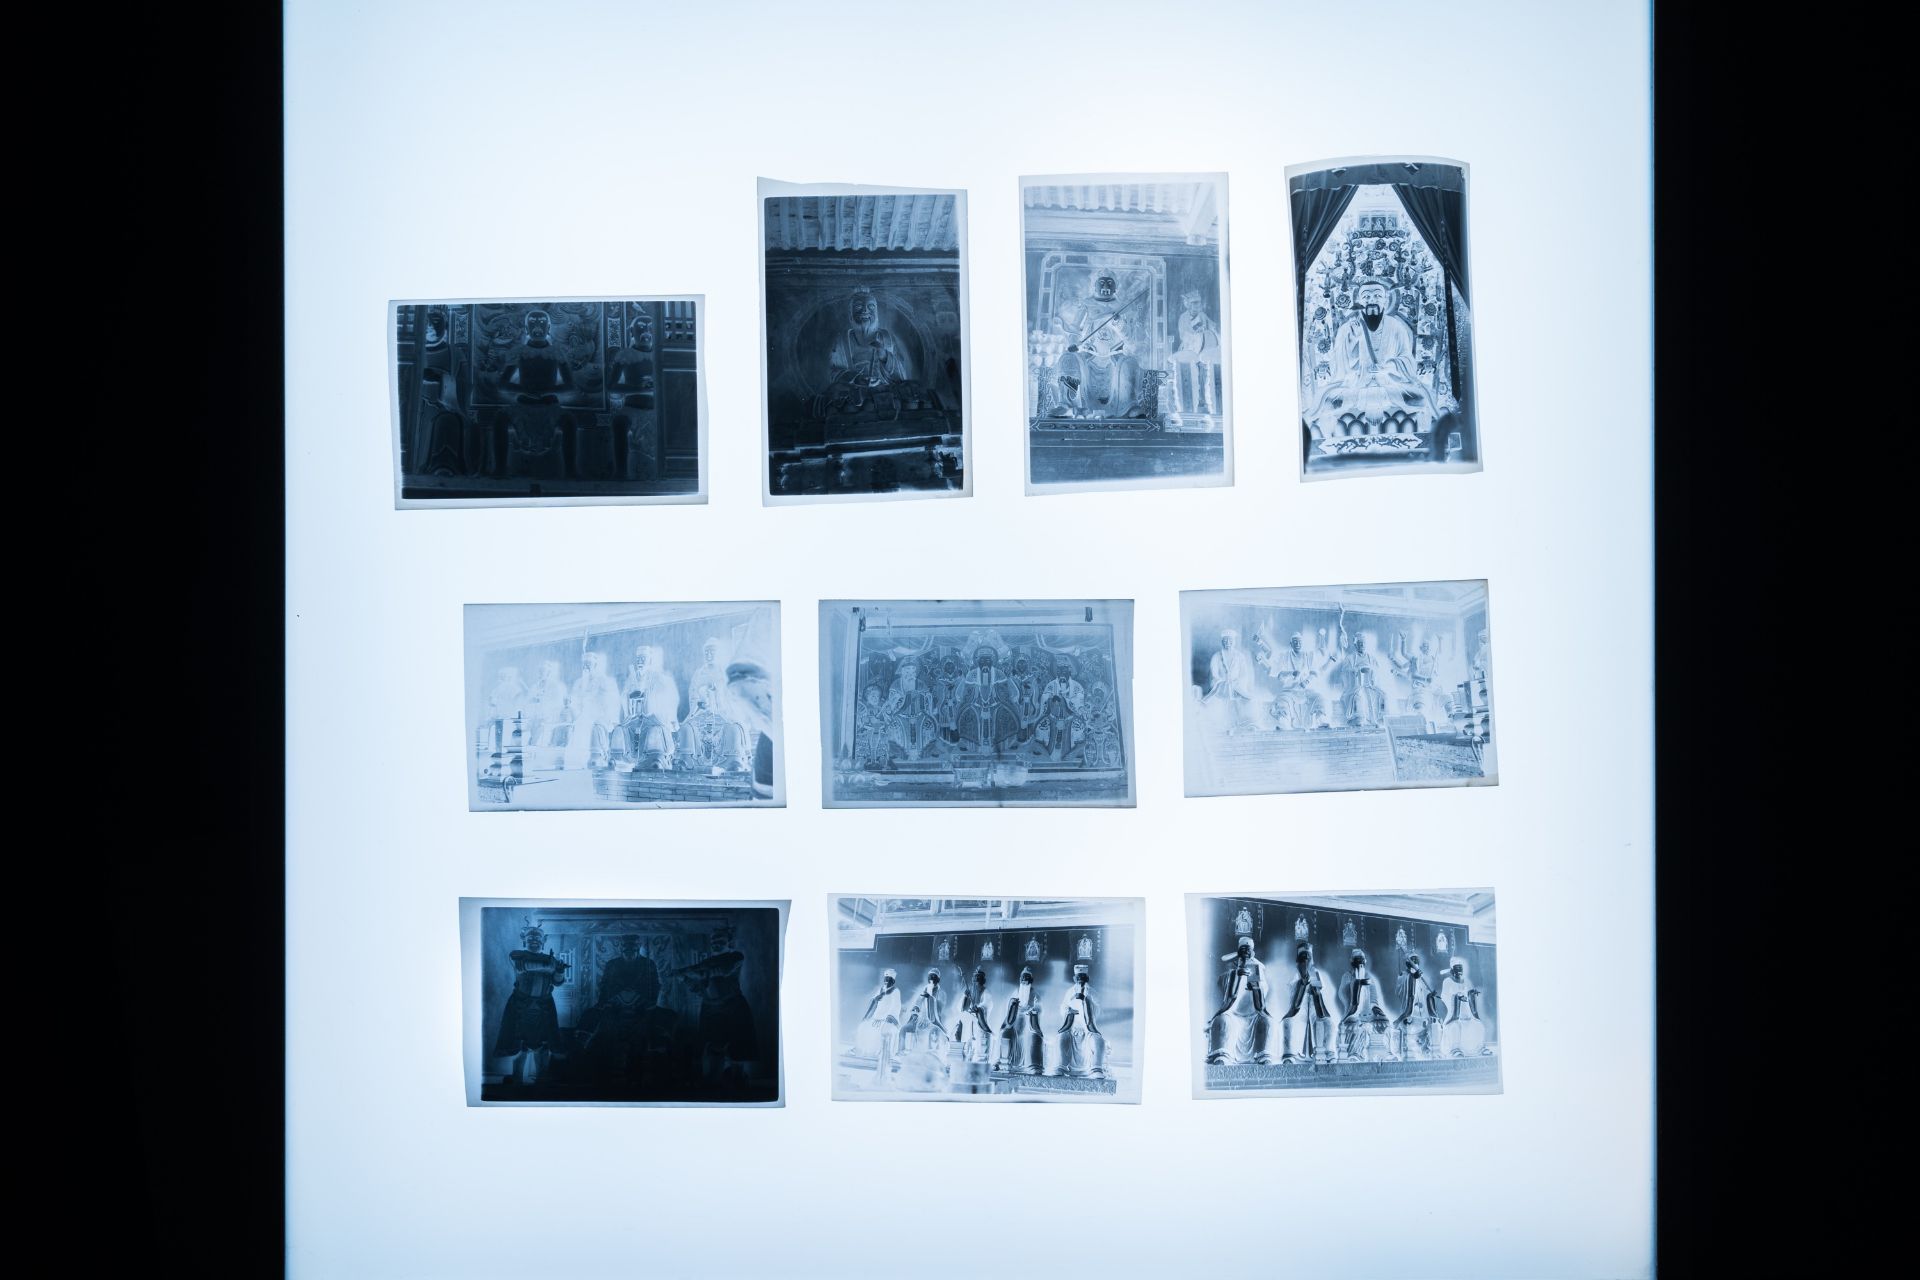 The photo archive of temples and artworks by Willem Grootaers for his book 'The sanctuaries in a Nor - Image 43 of 65